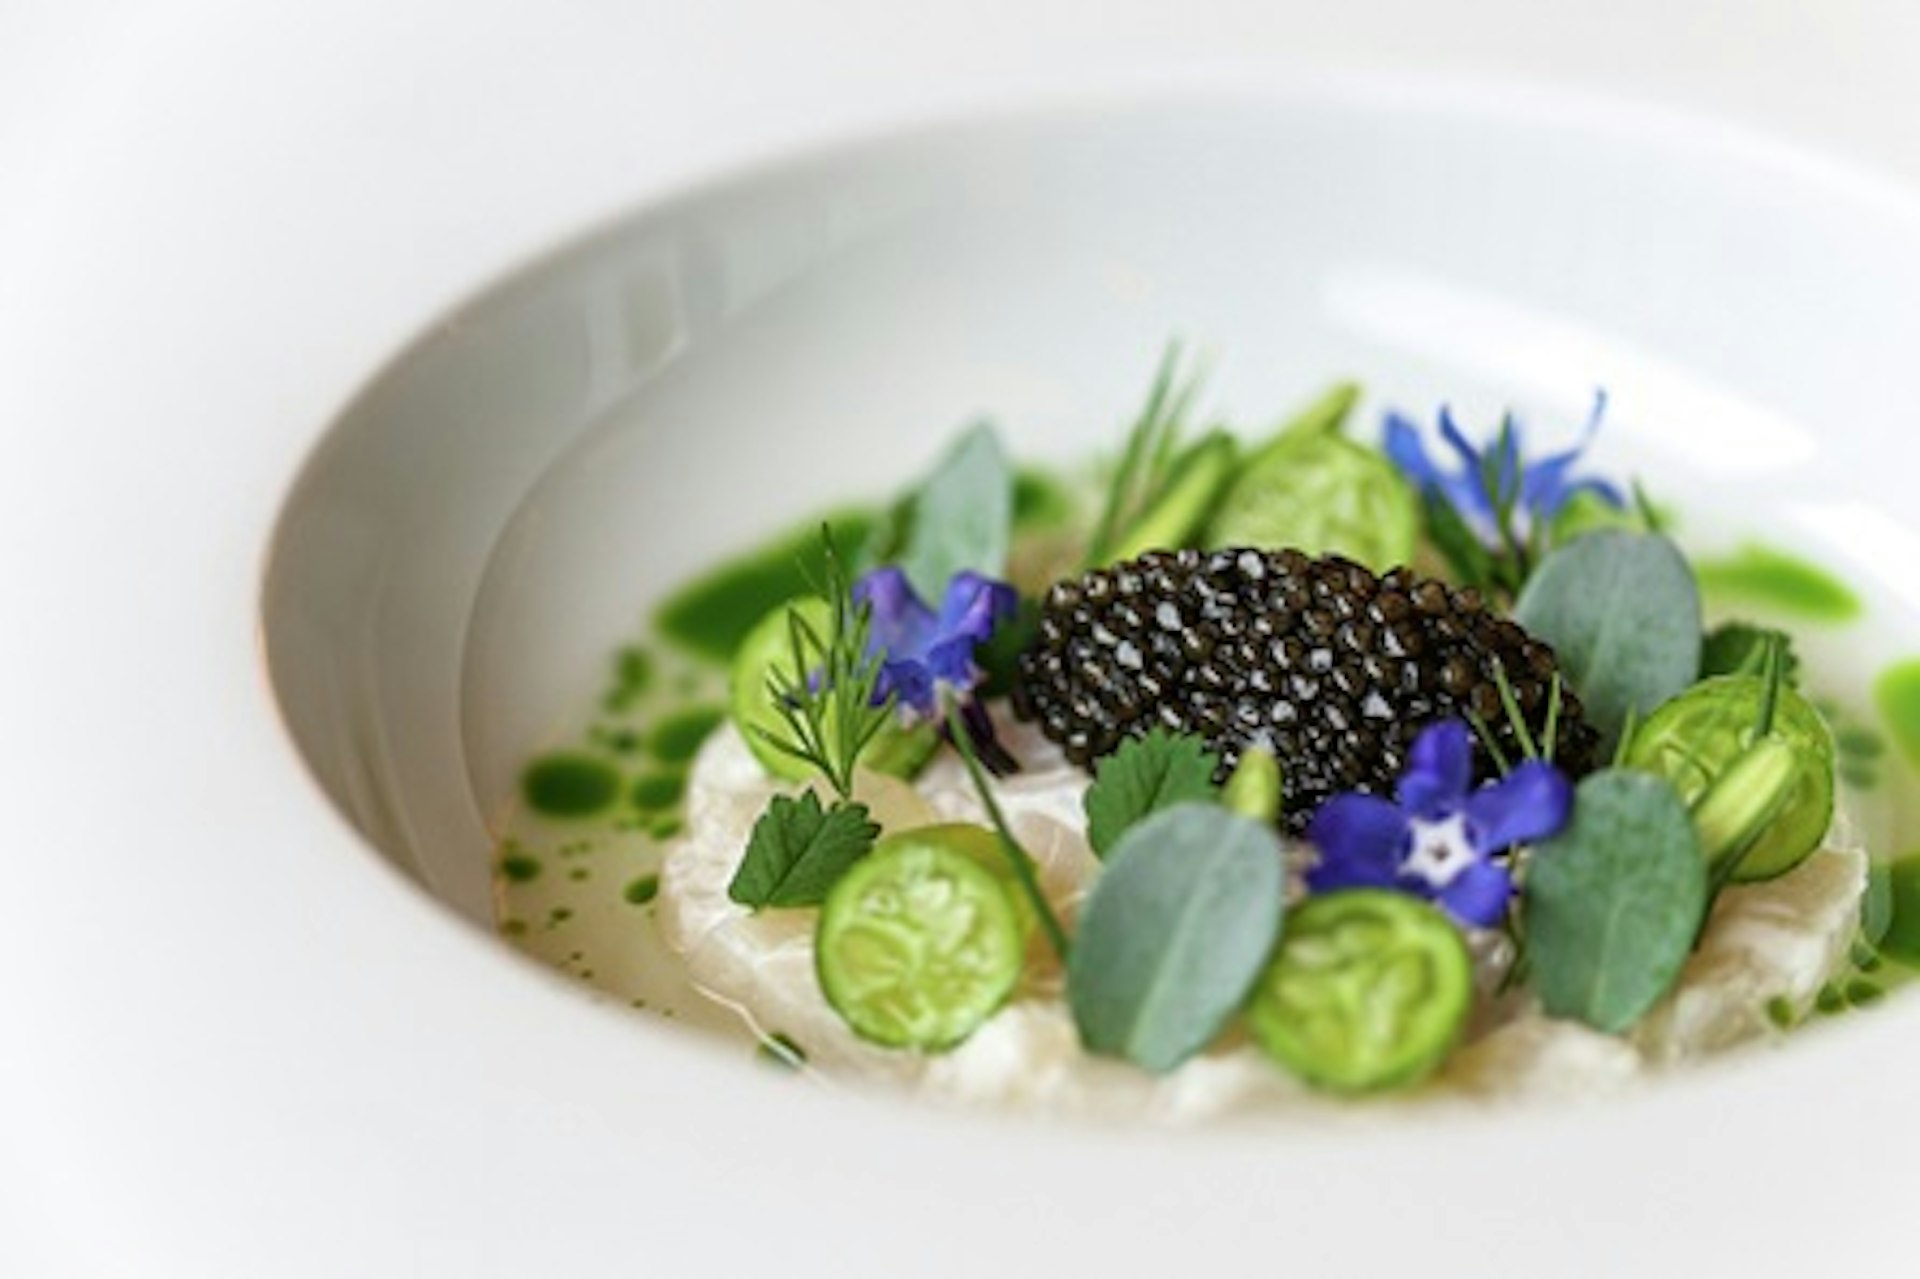 Kitchen Table Experience with Michelin Starred Seven Course Meal for Four at Gordon Ramsay's Pétrus 1